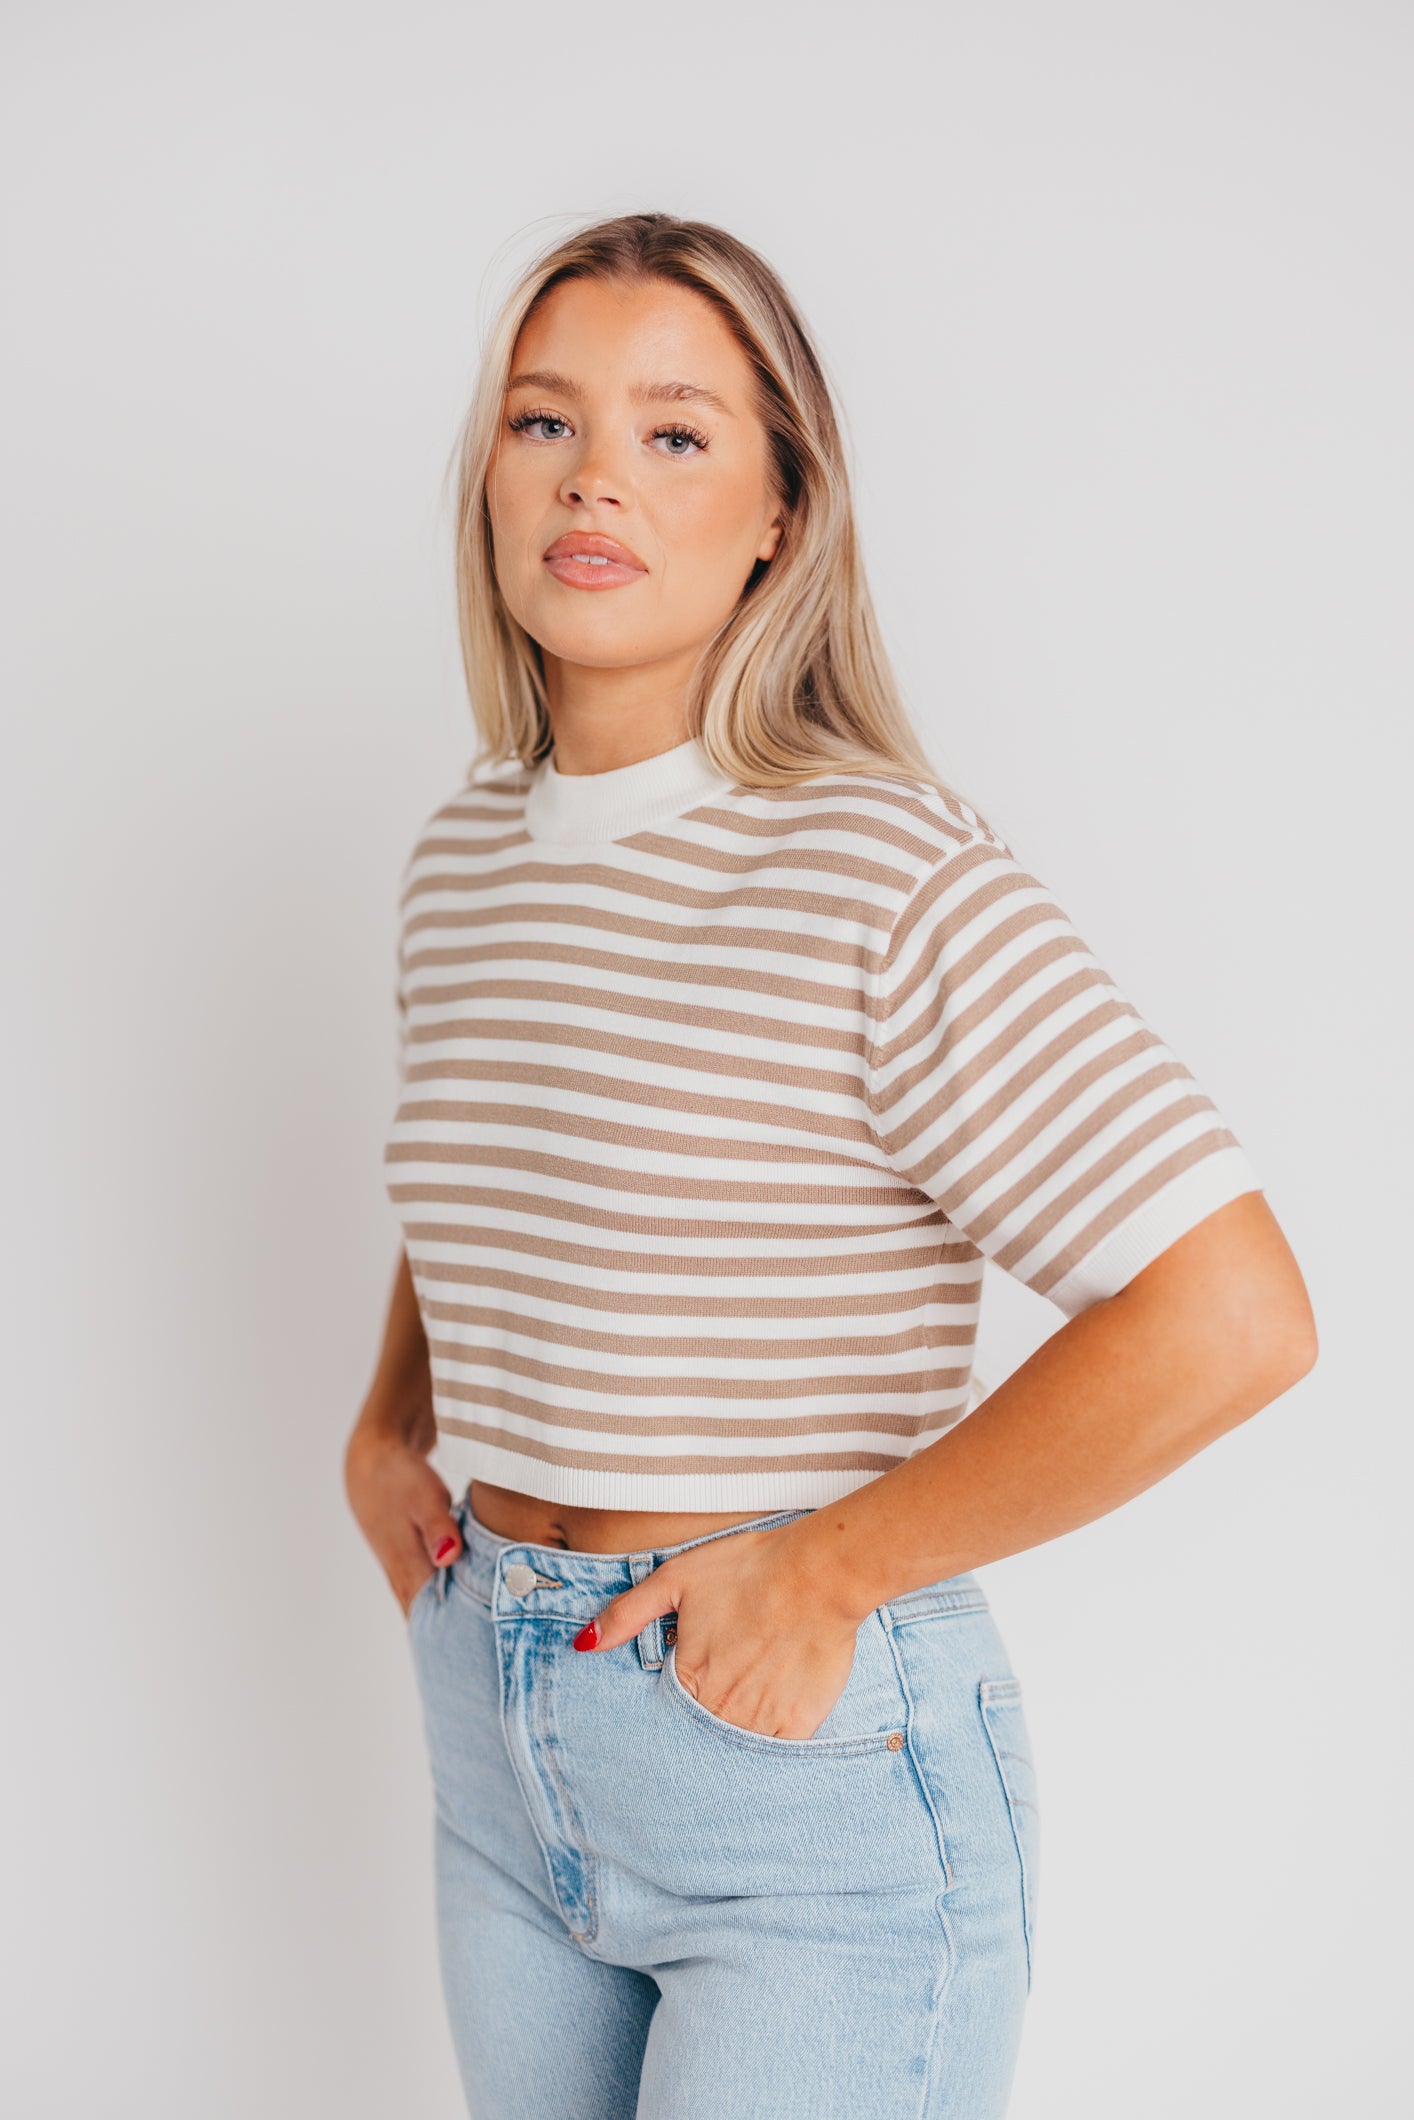 Anjou Short Sleeve Knitted Top in Tan/White